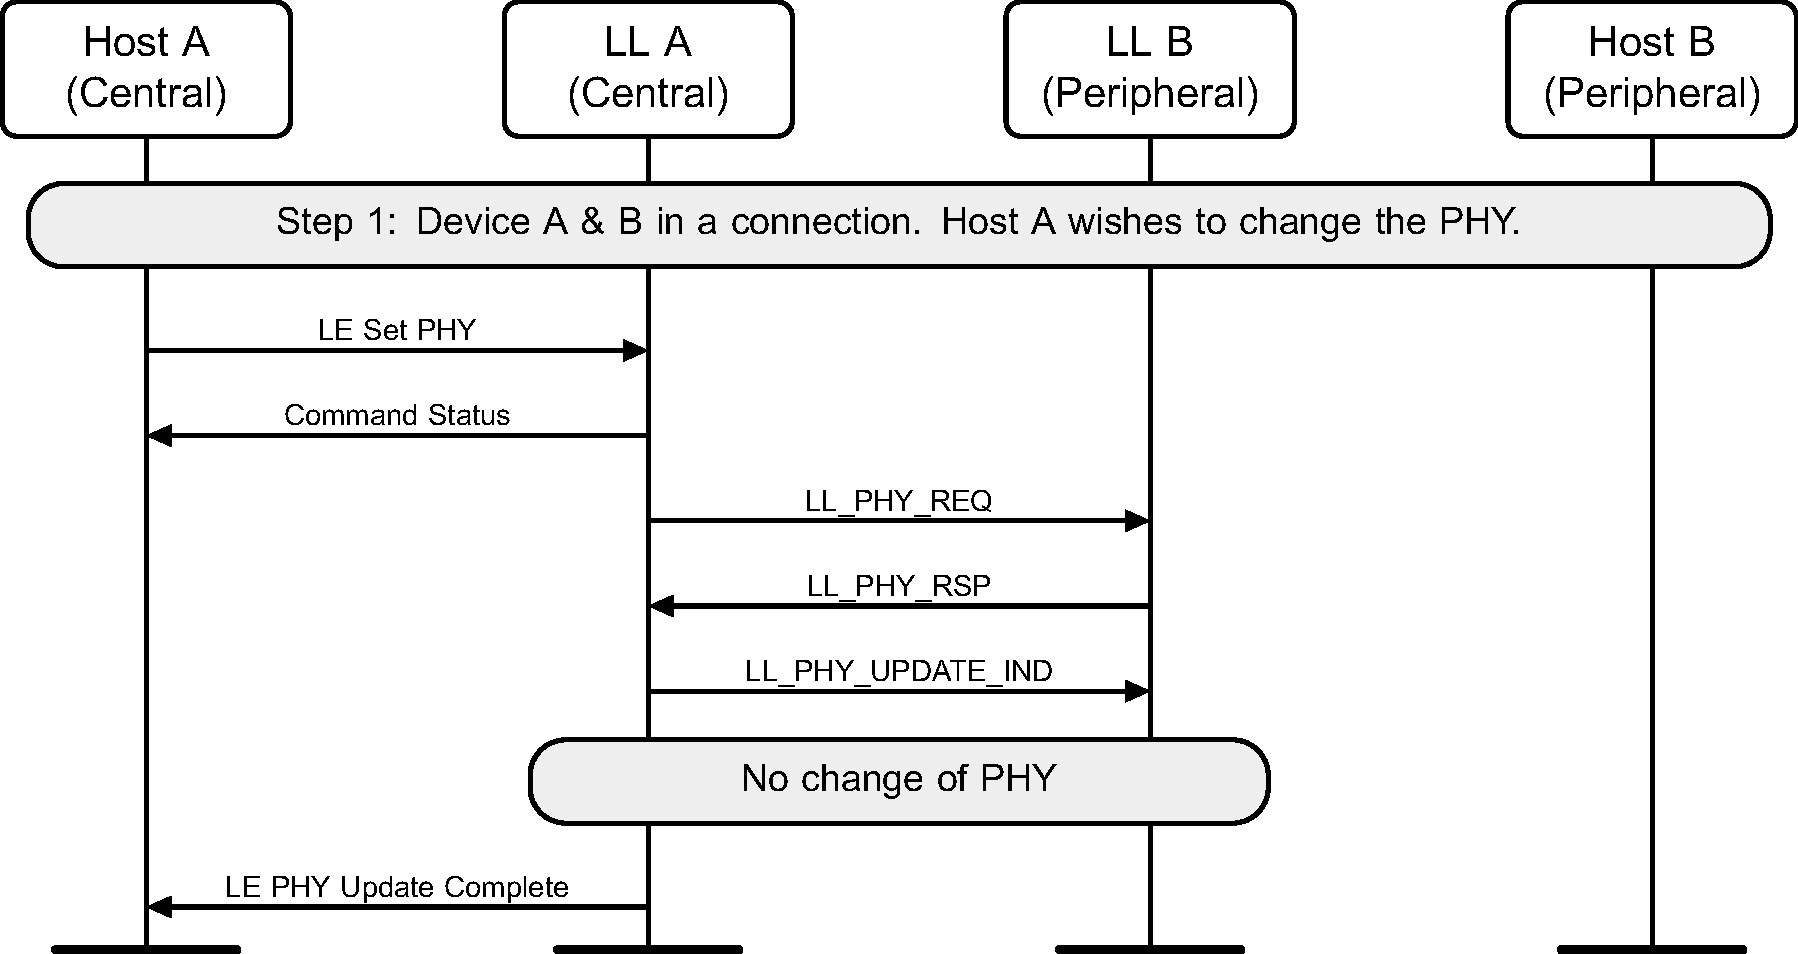 Central-initiated PHY Update procedure – PHY not changed (either because Peripheral doesn't specify PHYs that the Central prefers, or because the Central concludes that the current PHYs are still best)